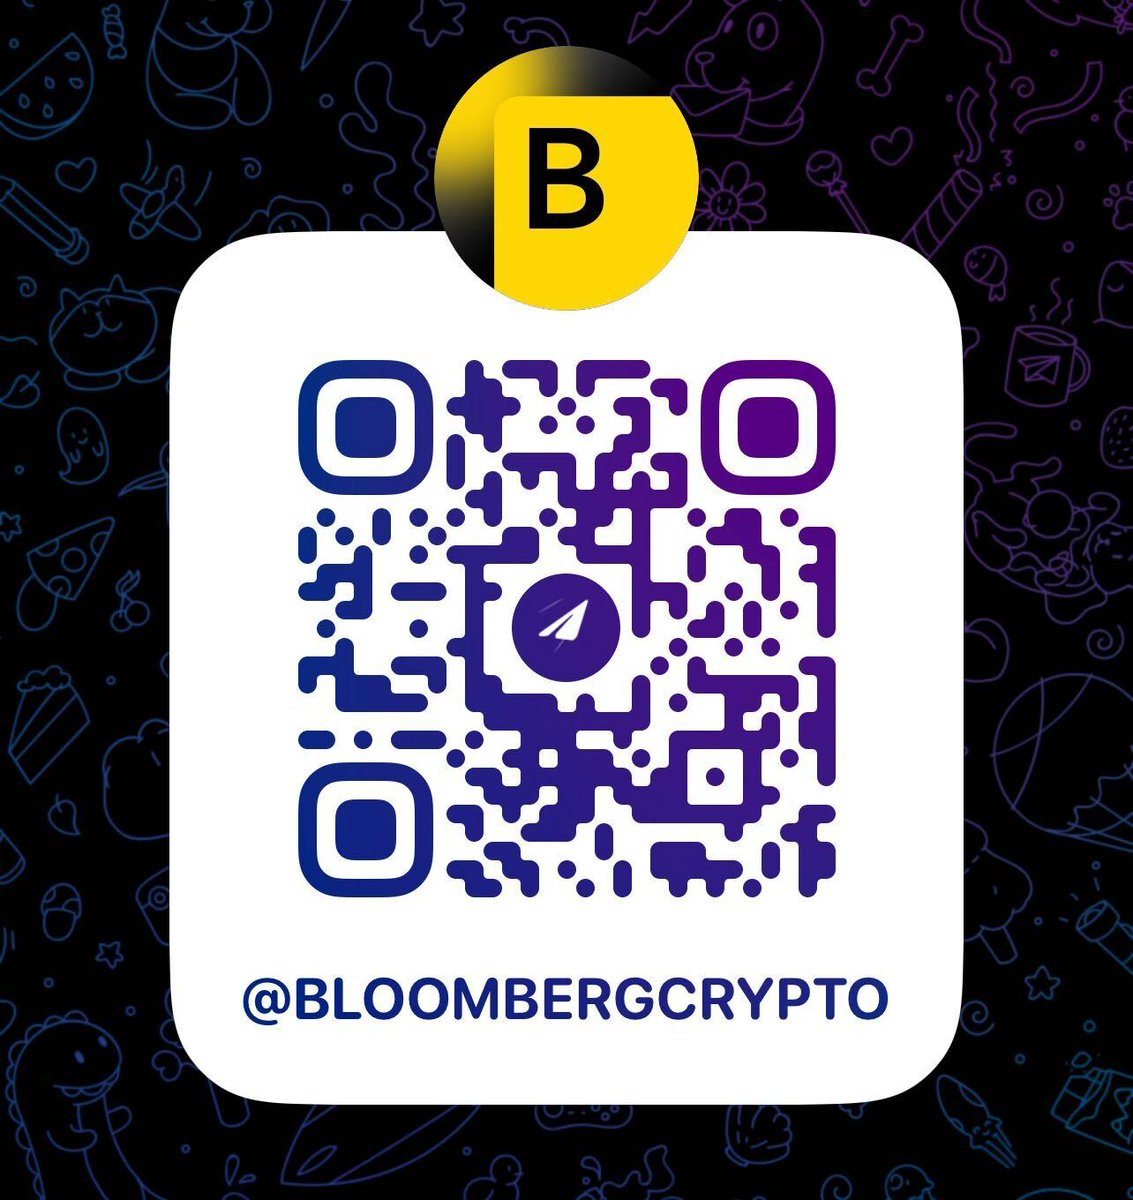 Bloomberg Crypto is on Telegram. Join our channel for the latest news and analysis from the crypto universe trib.al/ZVUd2U5